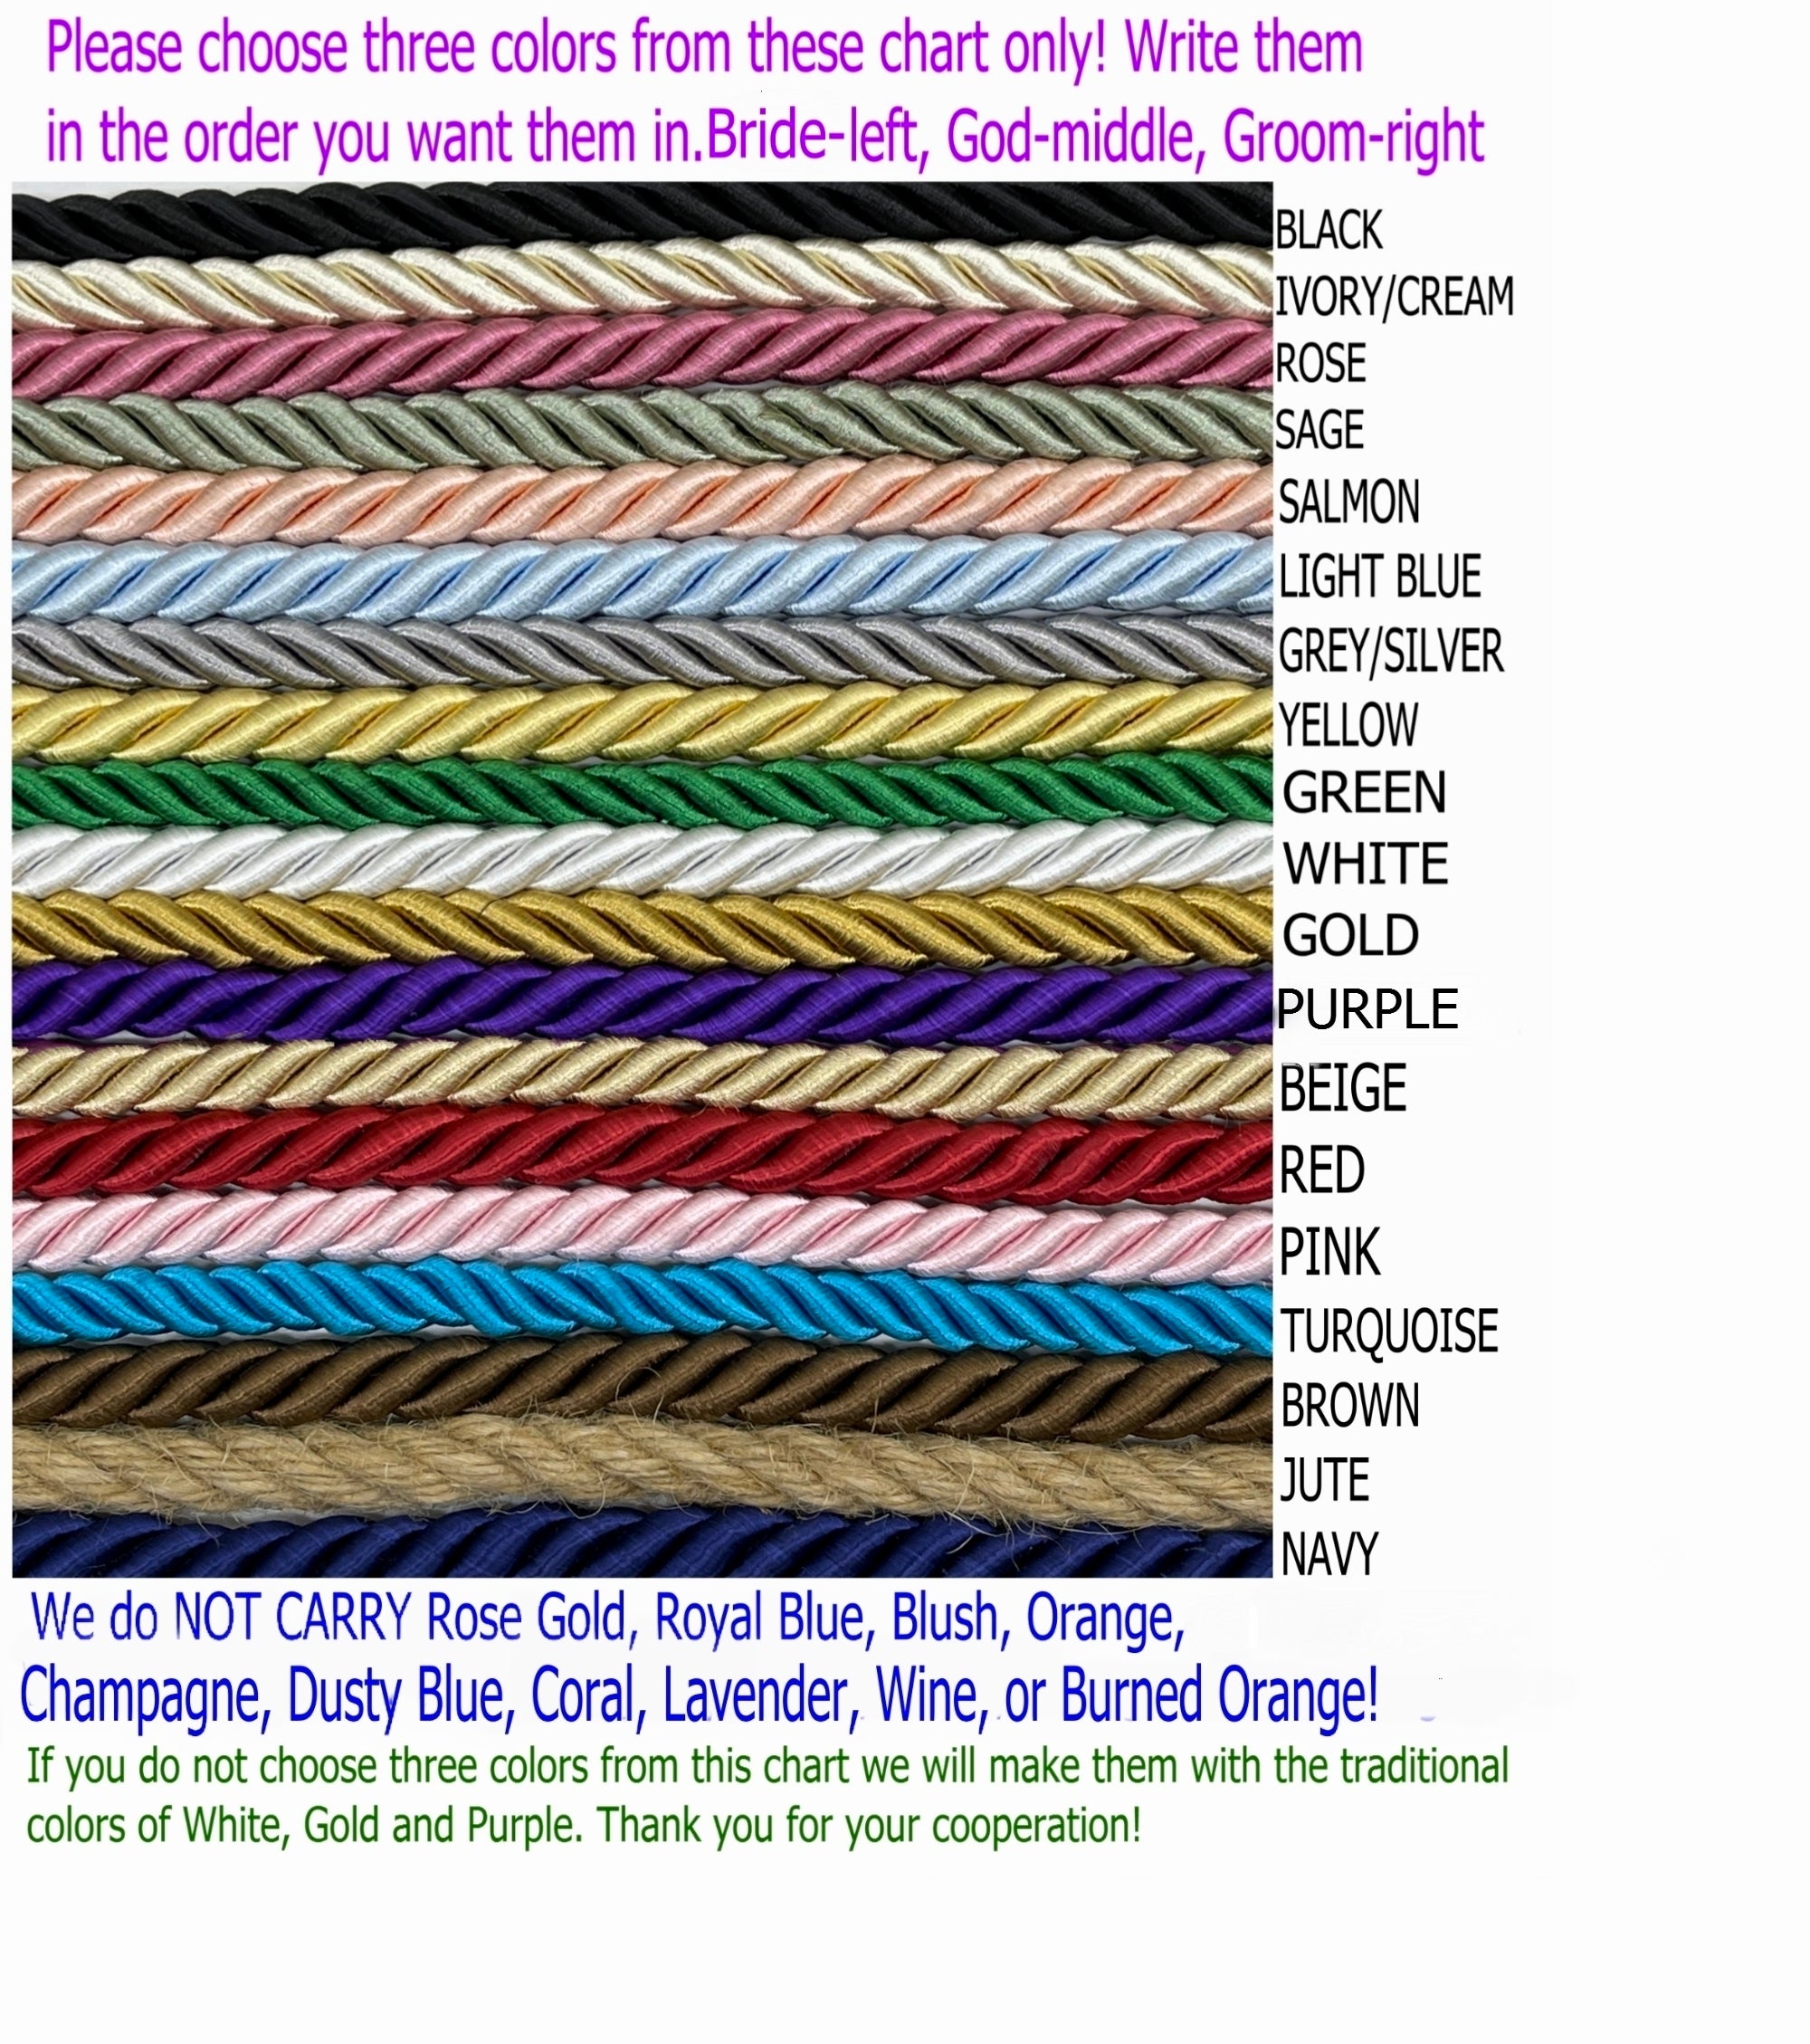 Unity Braids®, Cord Of Three Strands, Tying The Unity Knot, Unity, Wedding Gift Ideas, Renewing Vows, 3/8" Cords On Sale!